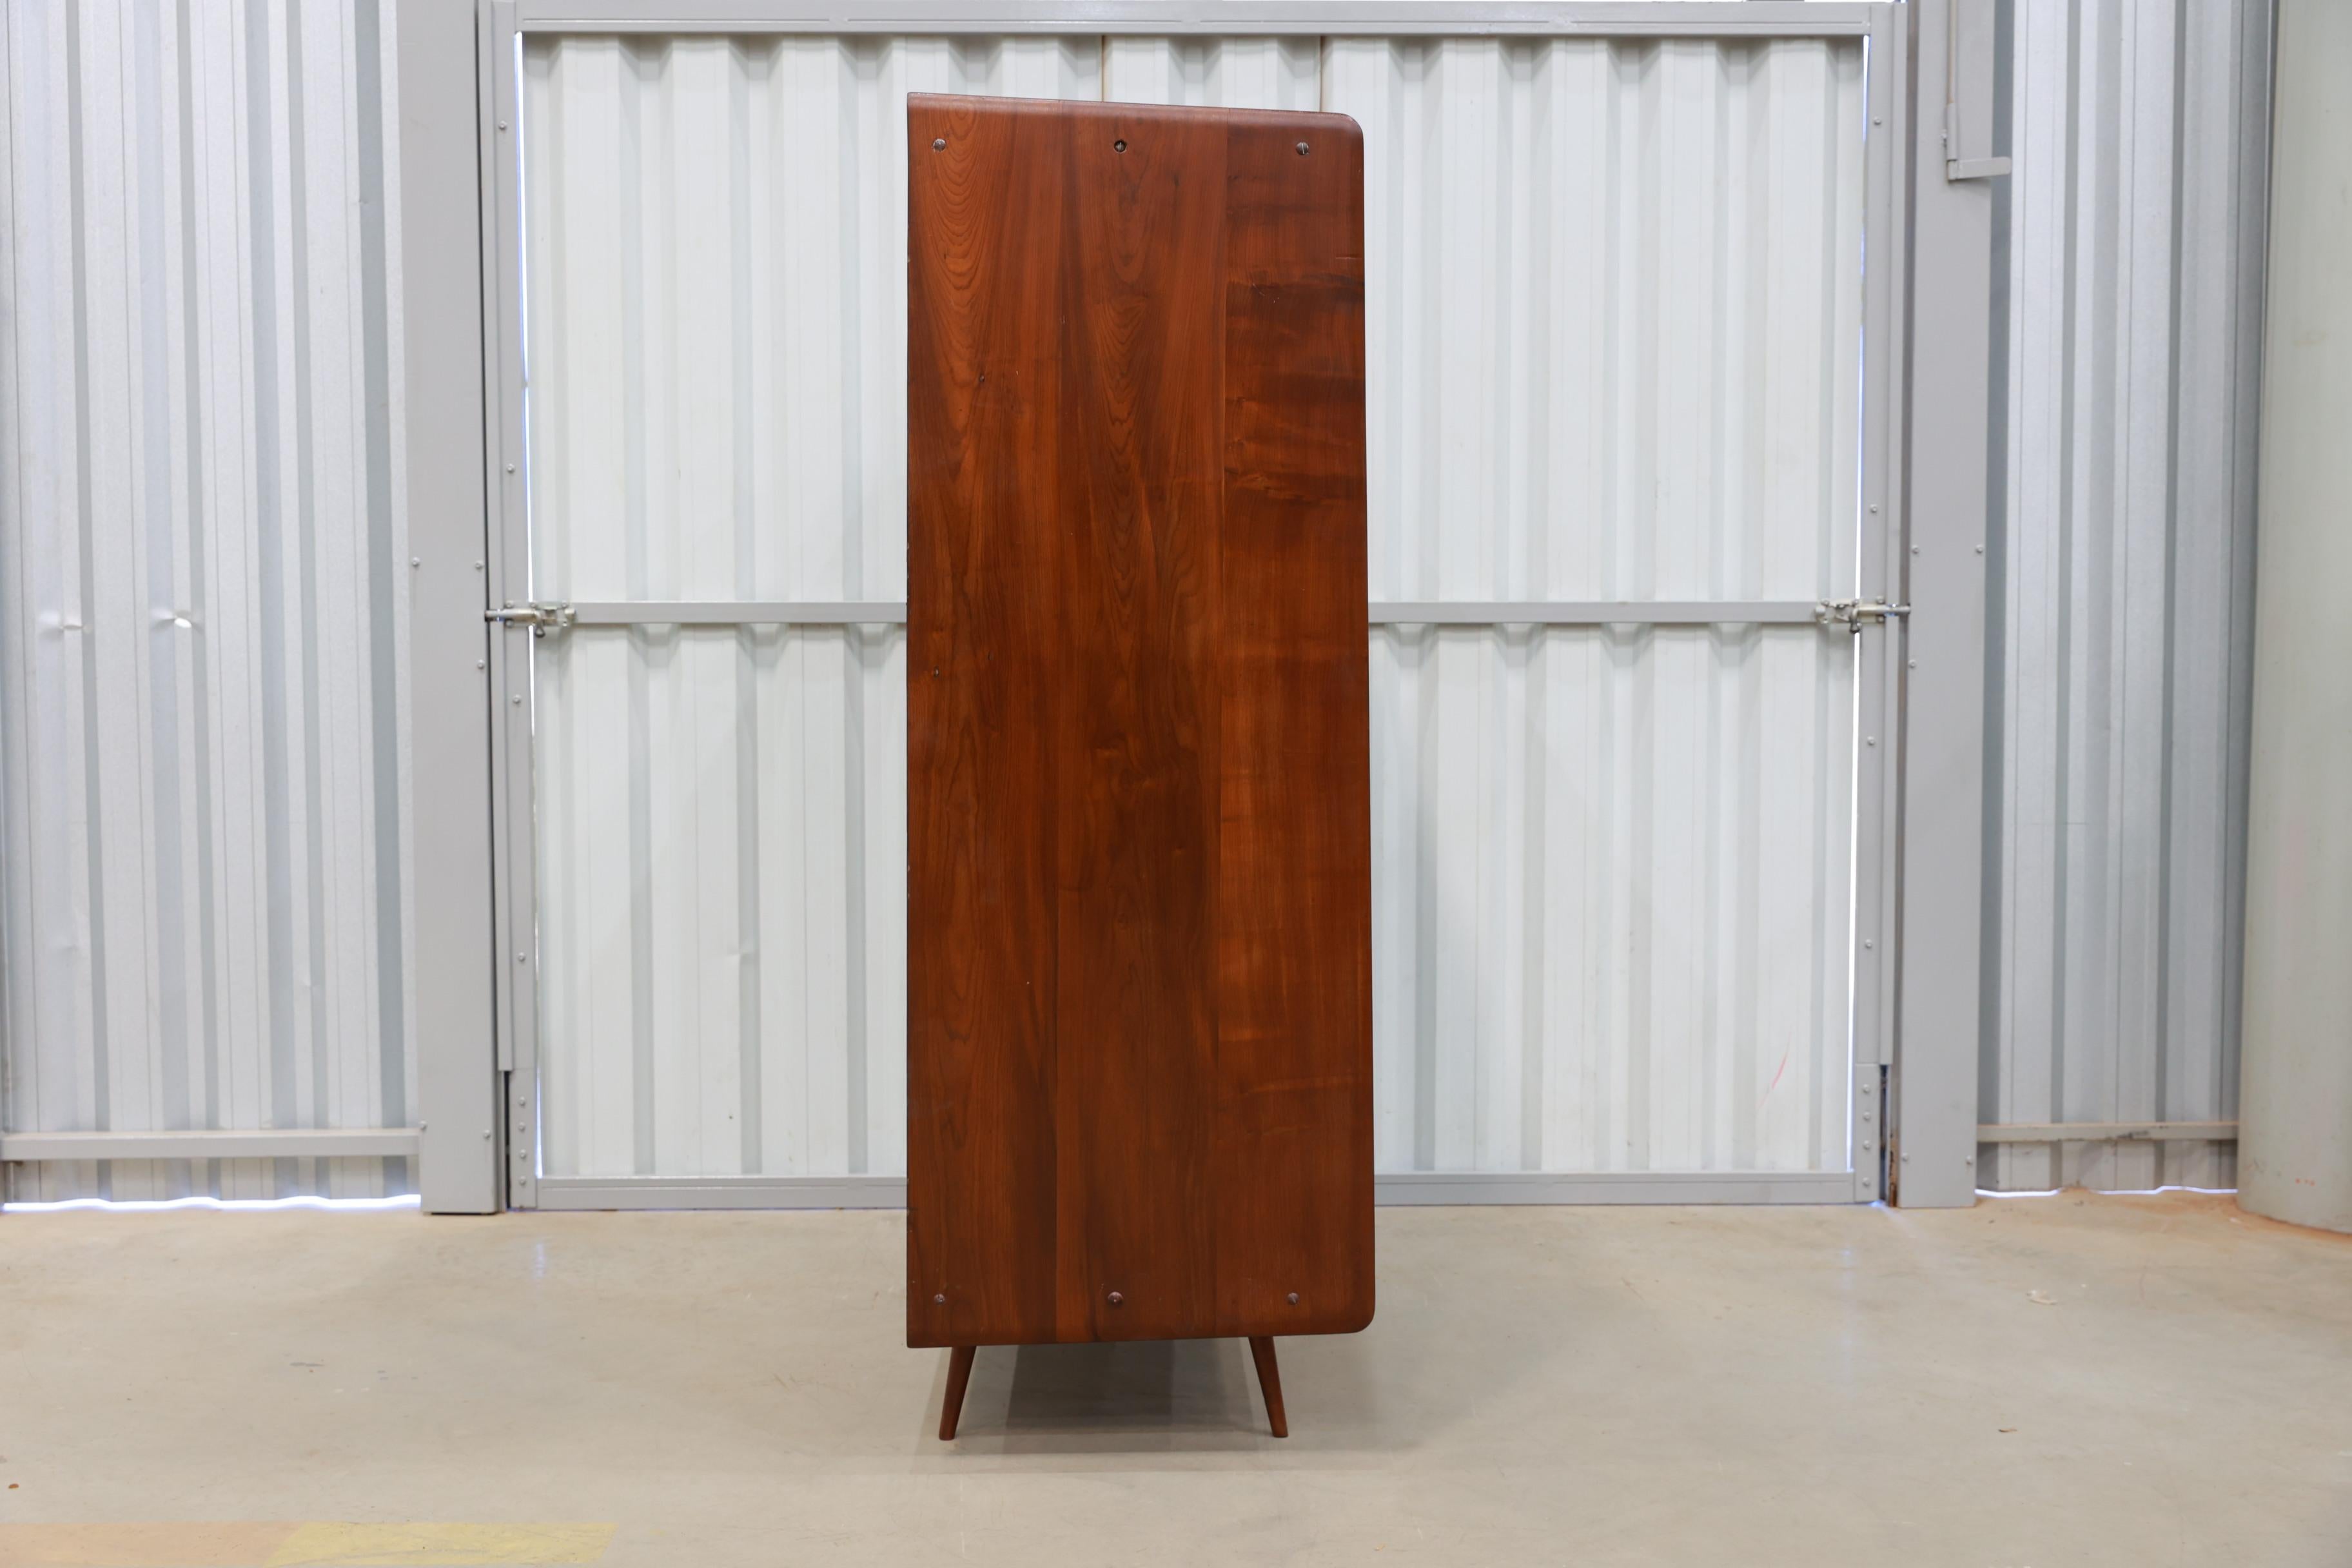 Brazilian Modern Armoire in Hardwood by Moveis Cimo, 1950s, Brazil For Sale 1